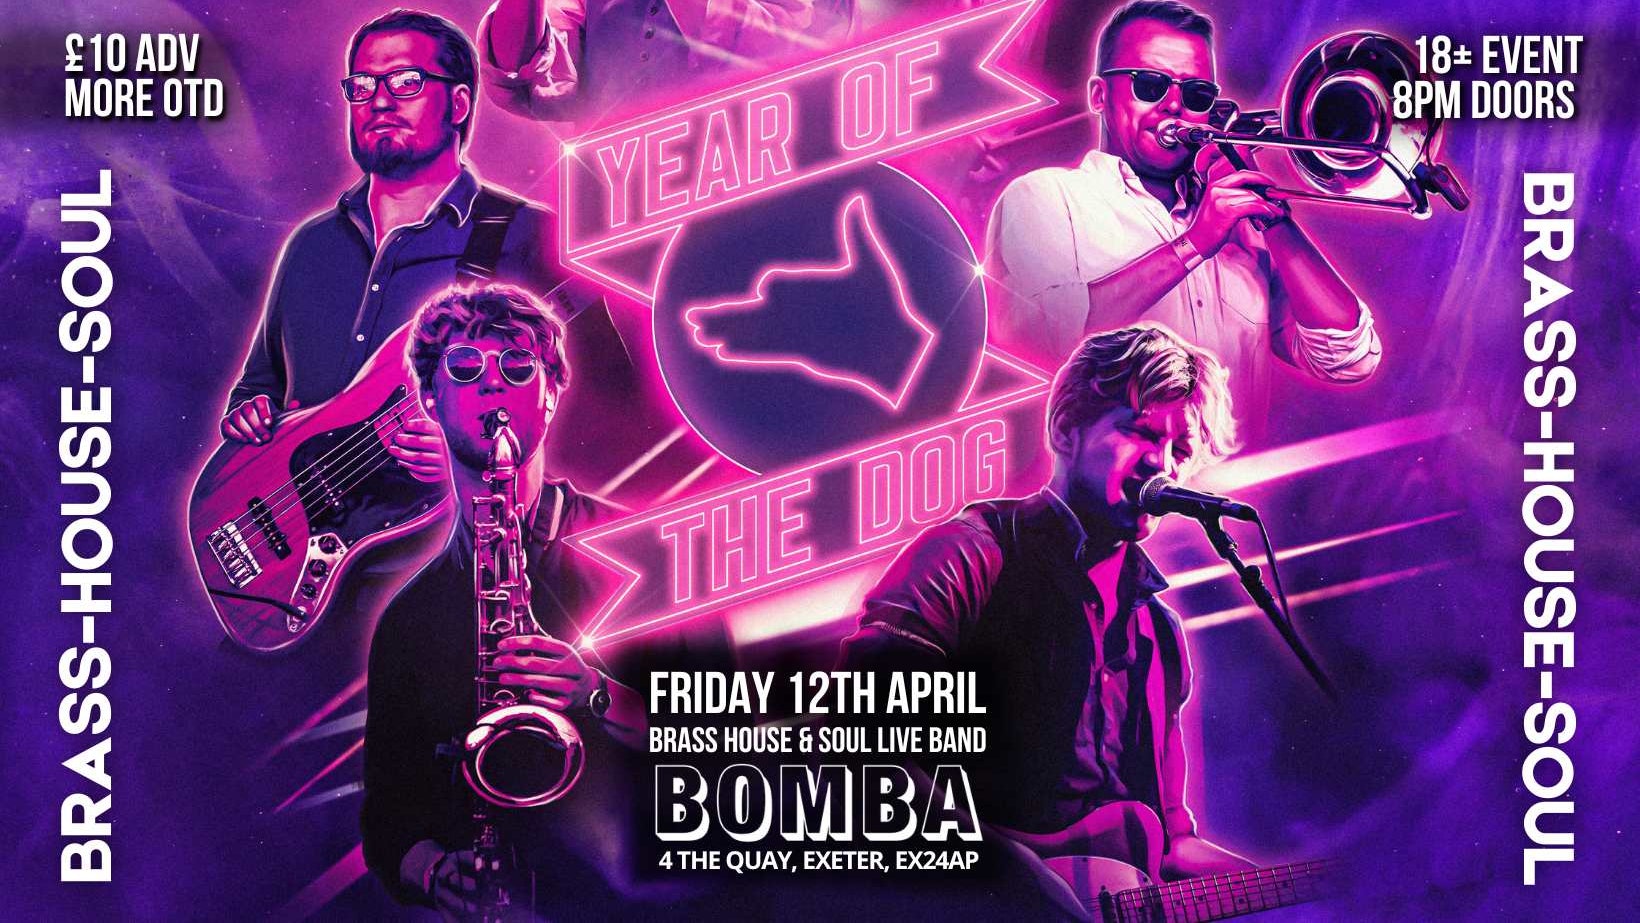 Year Of The Dog (Brass-House-Soul) live at Bomba, Exeter